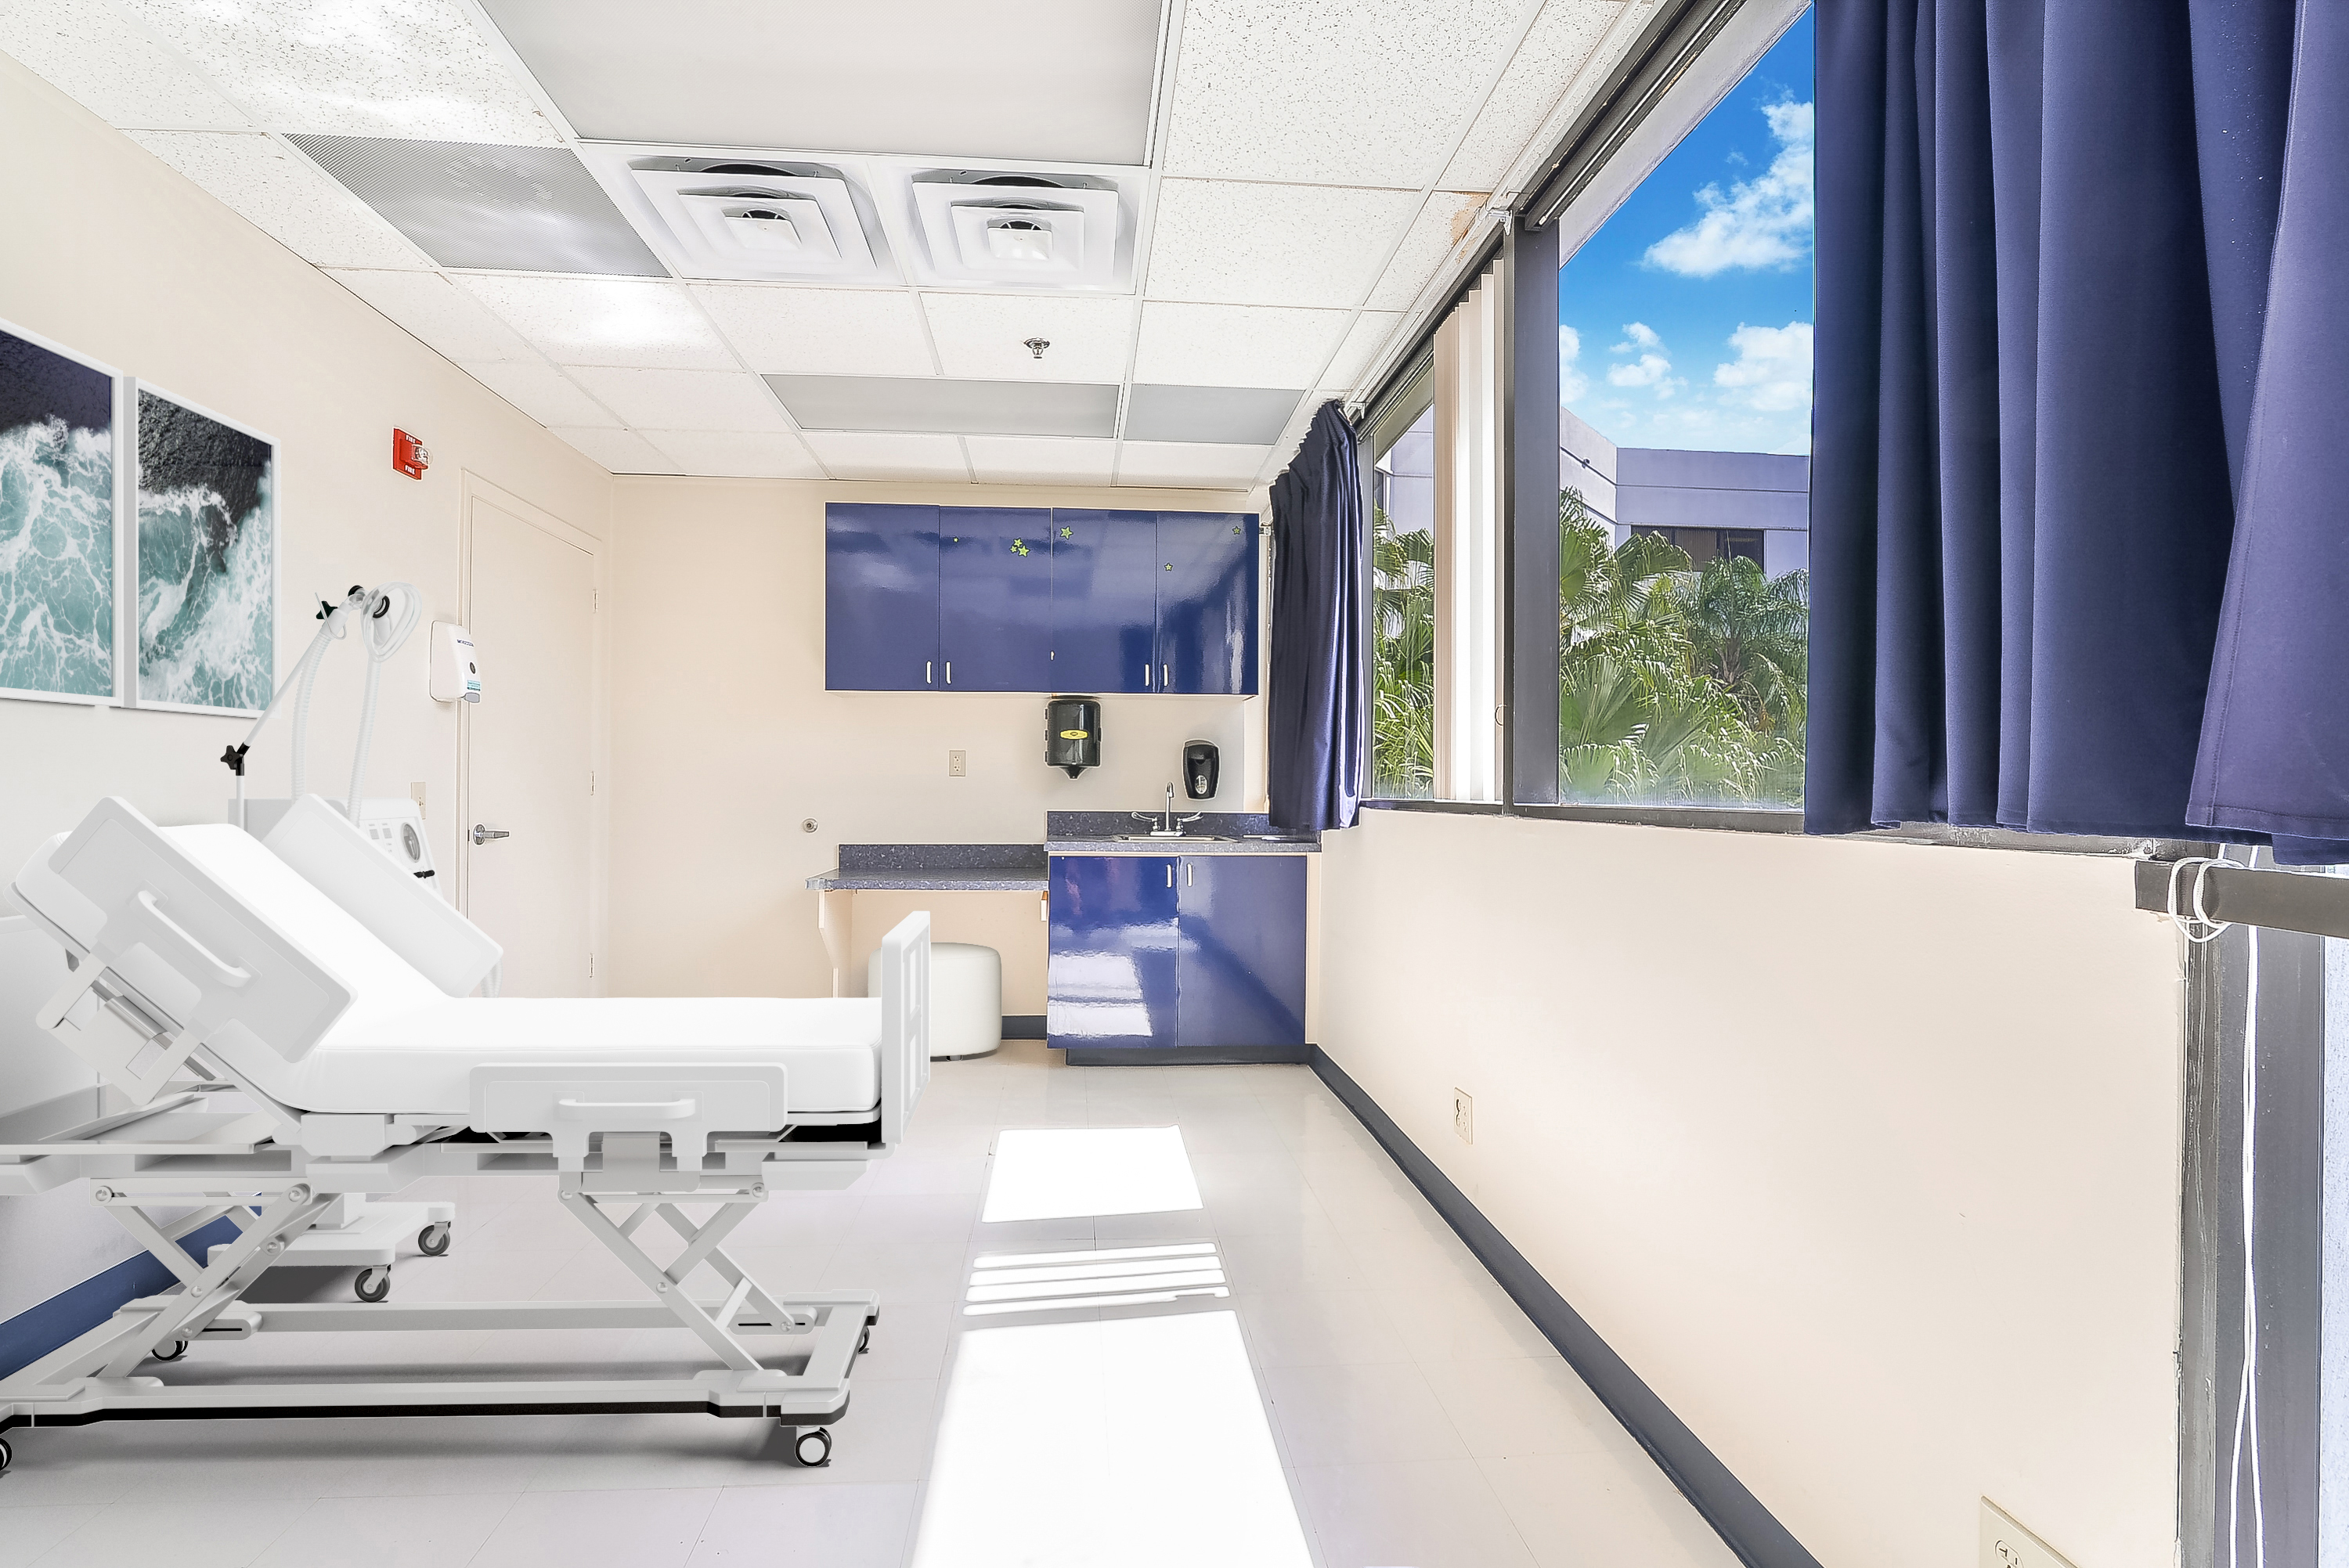 Medical suite with large windows, blue cabinets and patient bed.